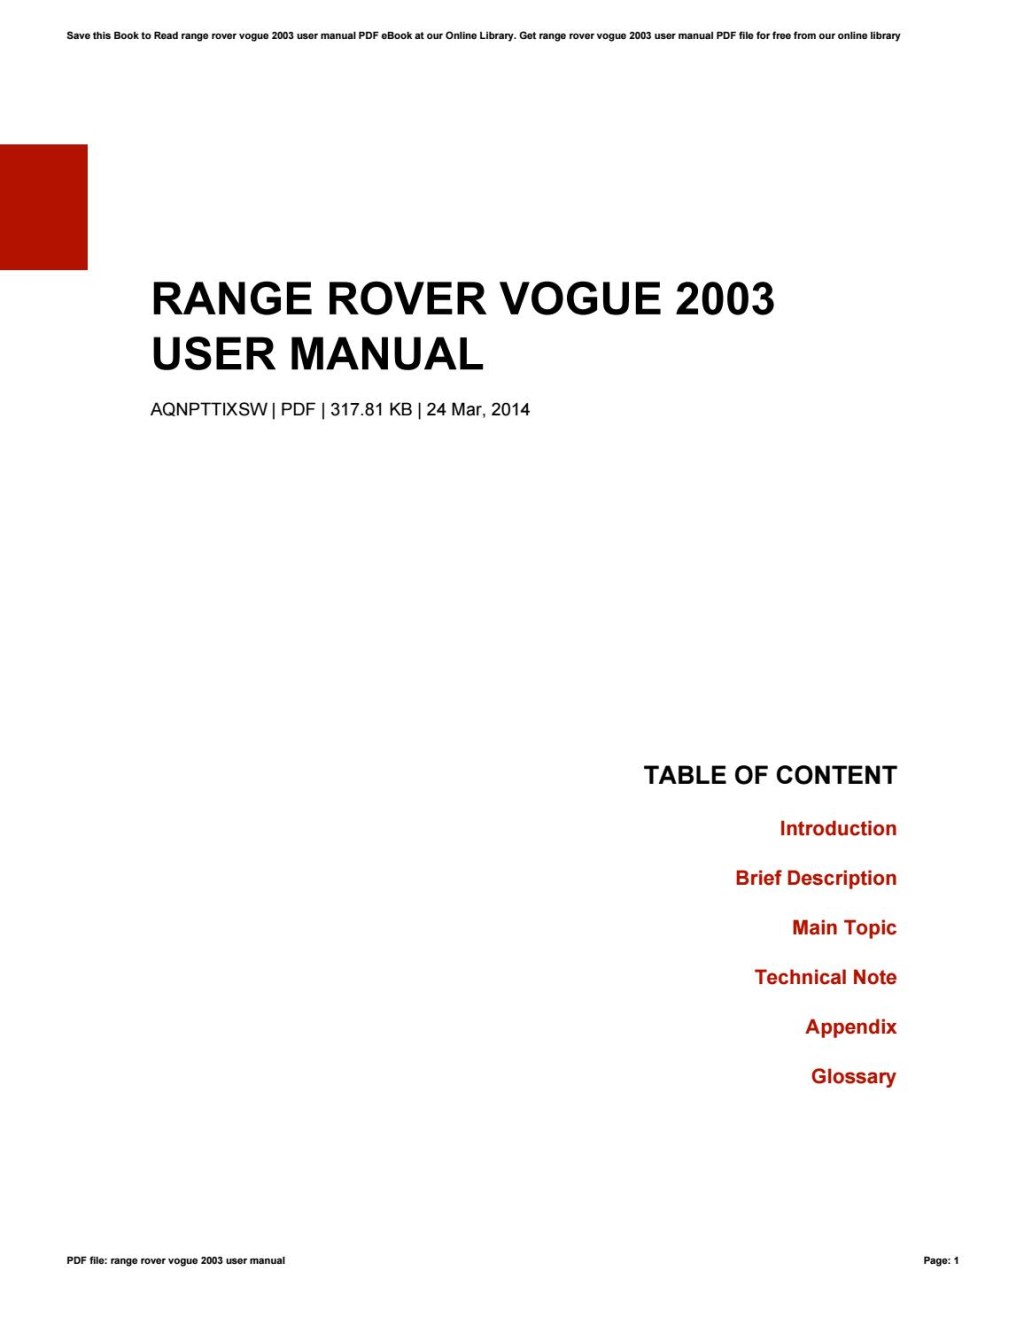 Picture of: Range rover vogue  user manual by JamesAust – Issuu